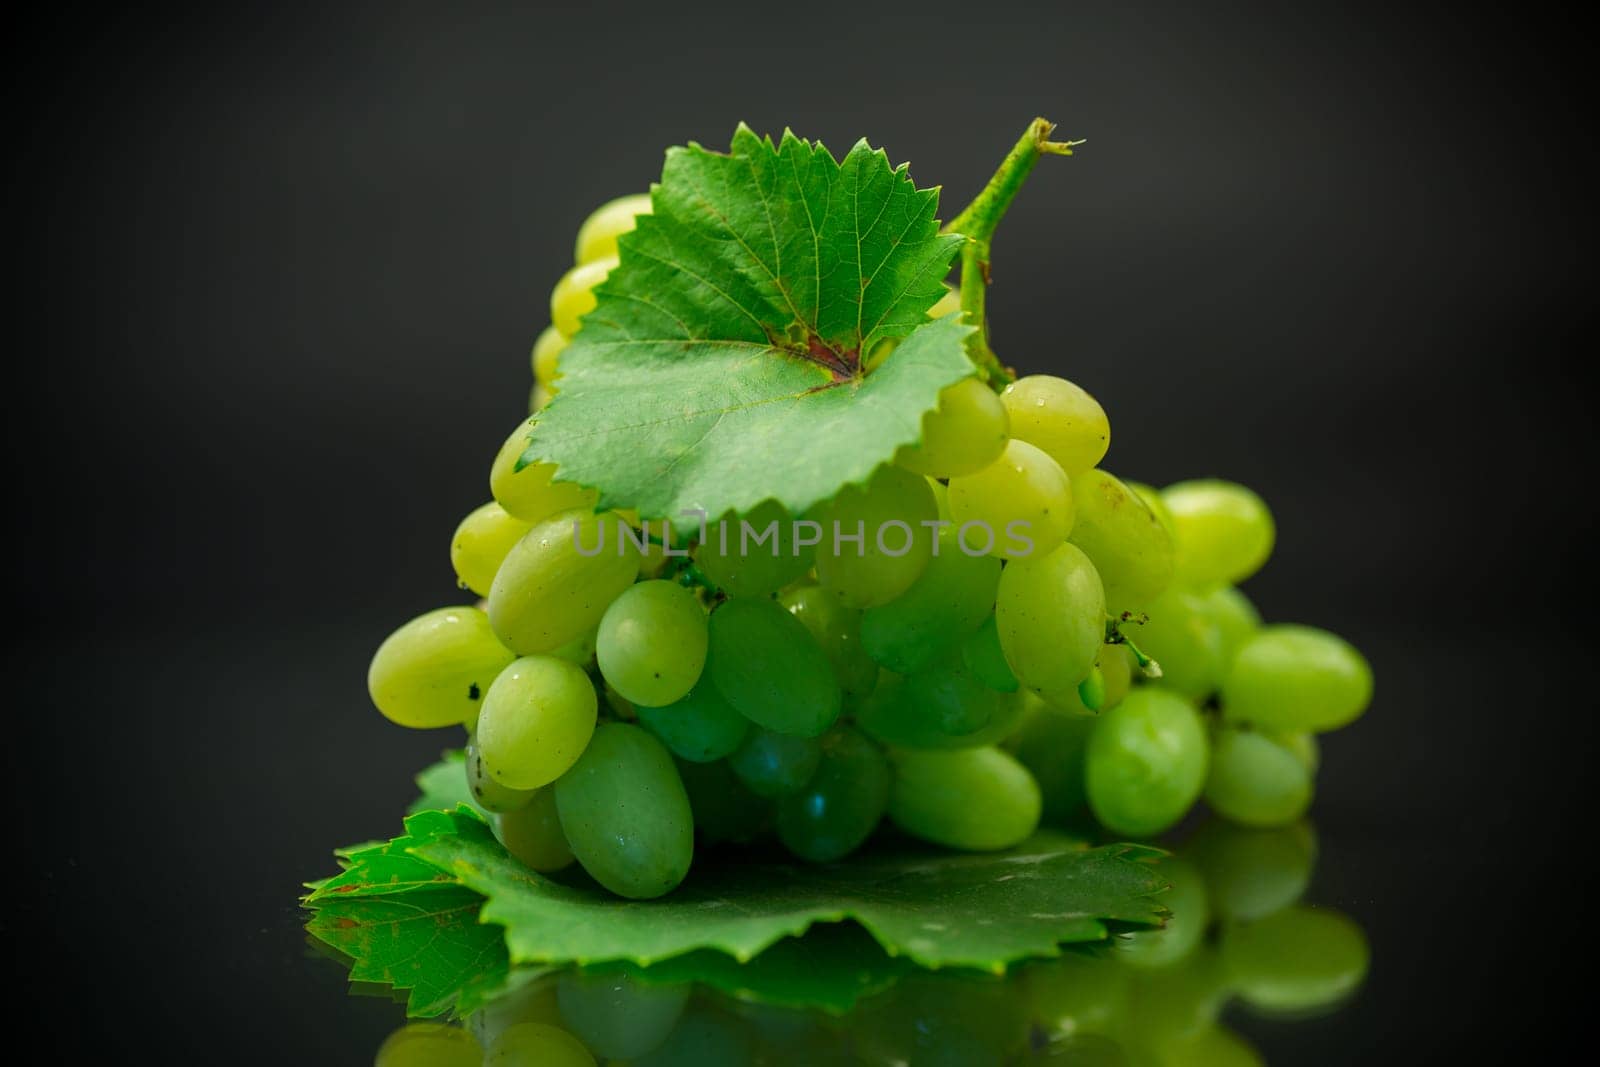 A bunch of ripe green grapes with leaves, isolated on a black background.